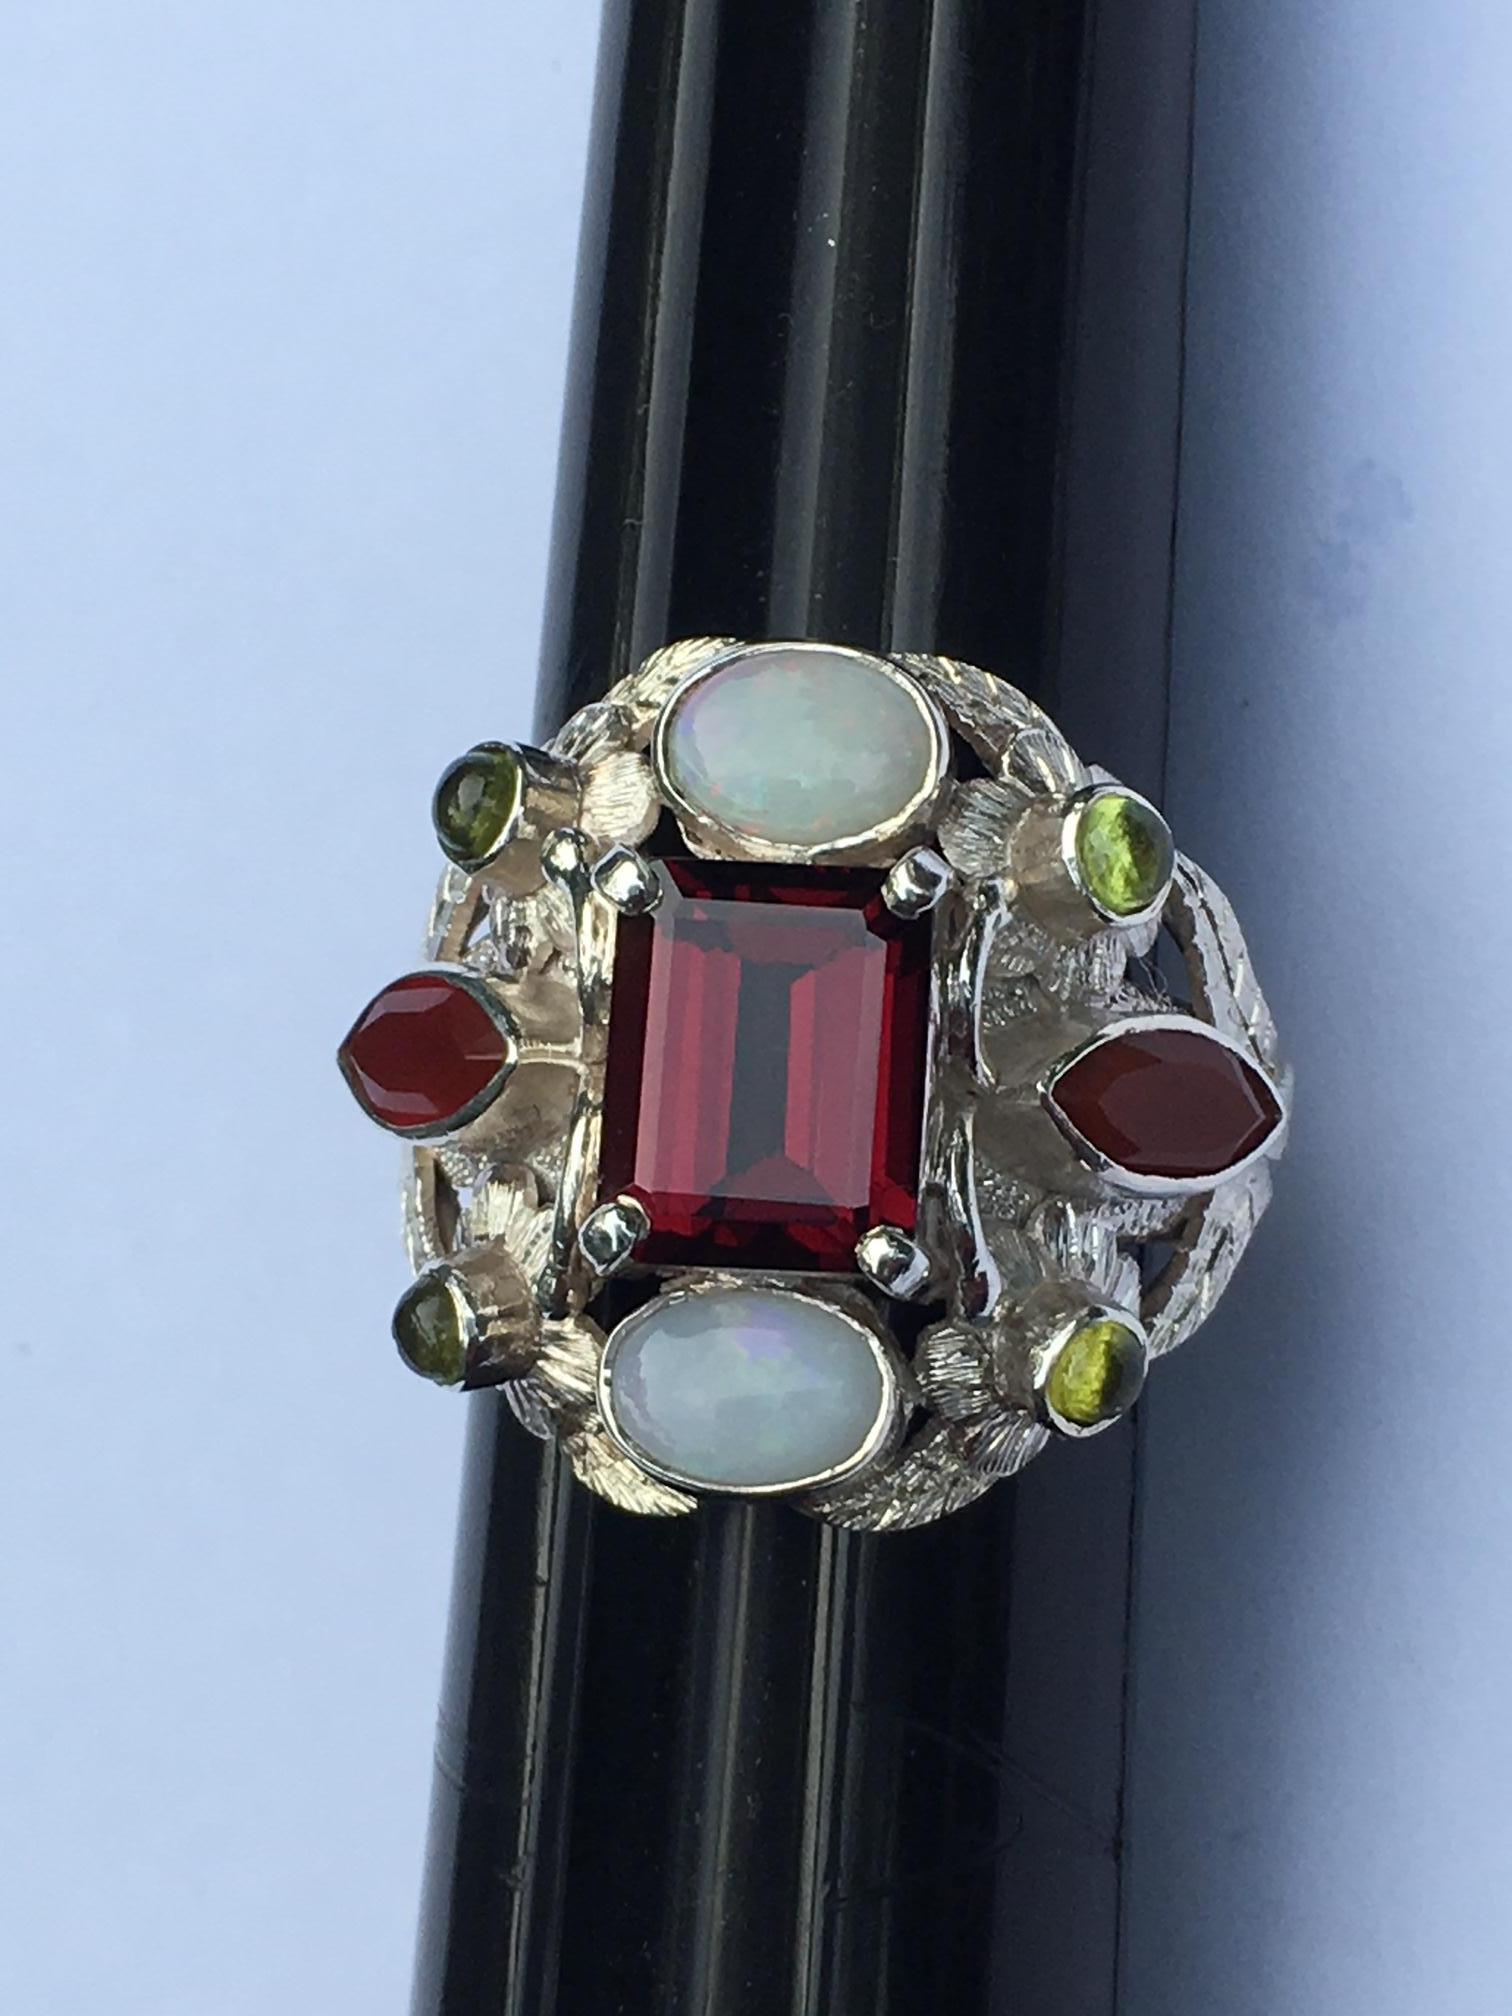 Women's Garnet, Opal, Carnelian and Peridot Cocktail Ring This item is on sale for Black